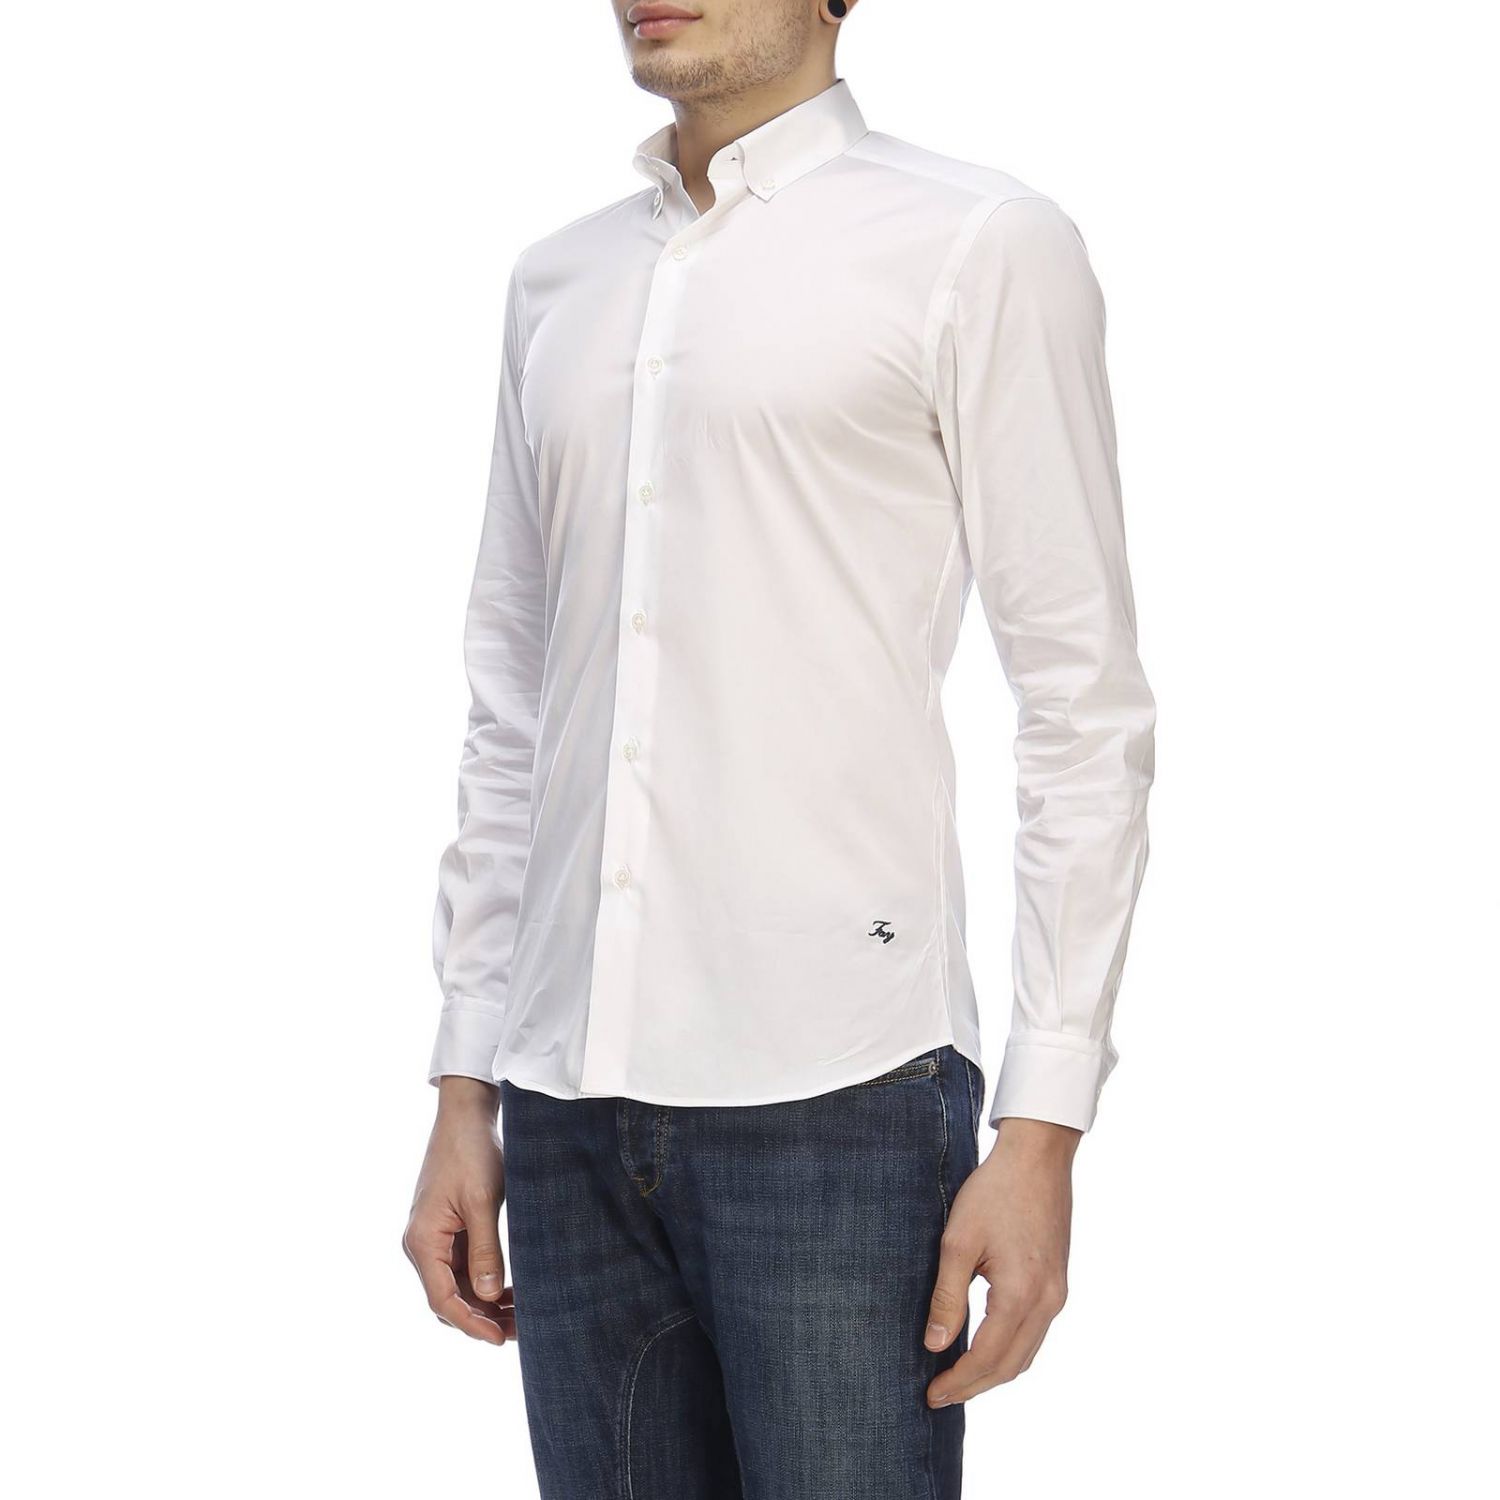 Fay Outlet: Shirt man - White | Fay Shirt NCMA138258S 0RM online at ...